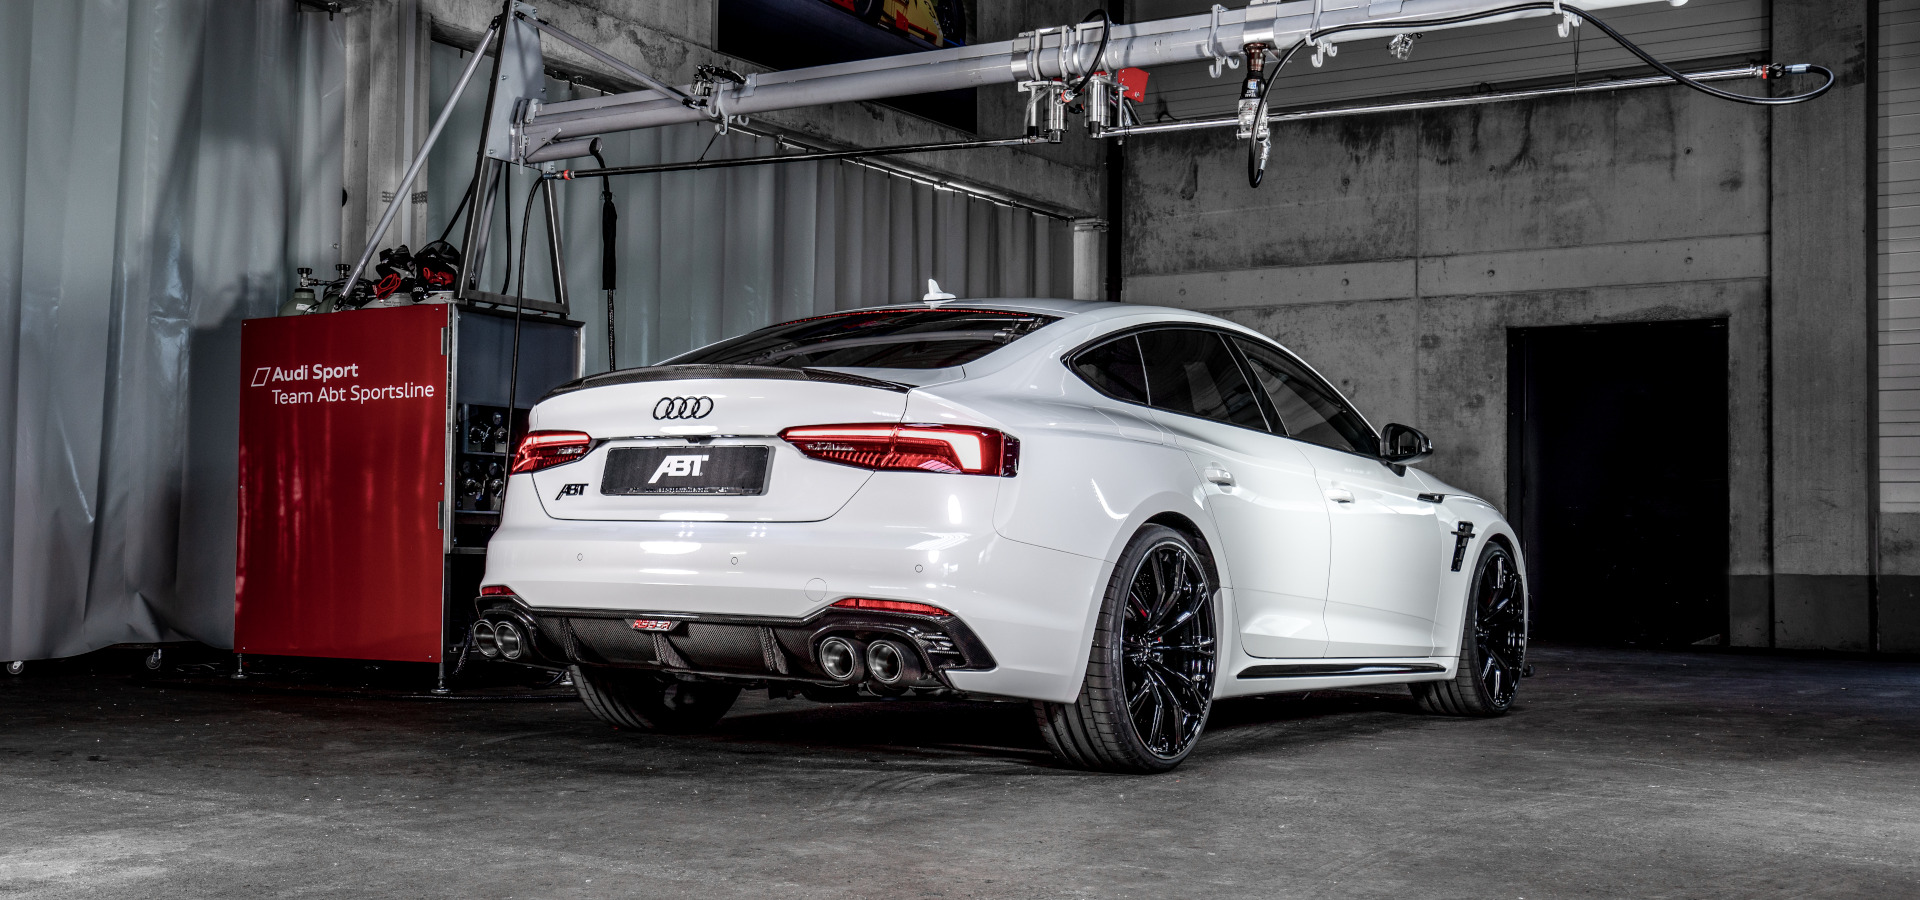 Abt Rs5 R Audi Tuning Vw Tuning Chiptuning Von Abt Sportsline